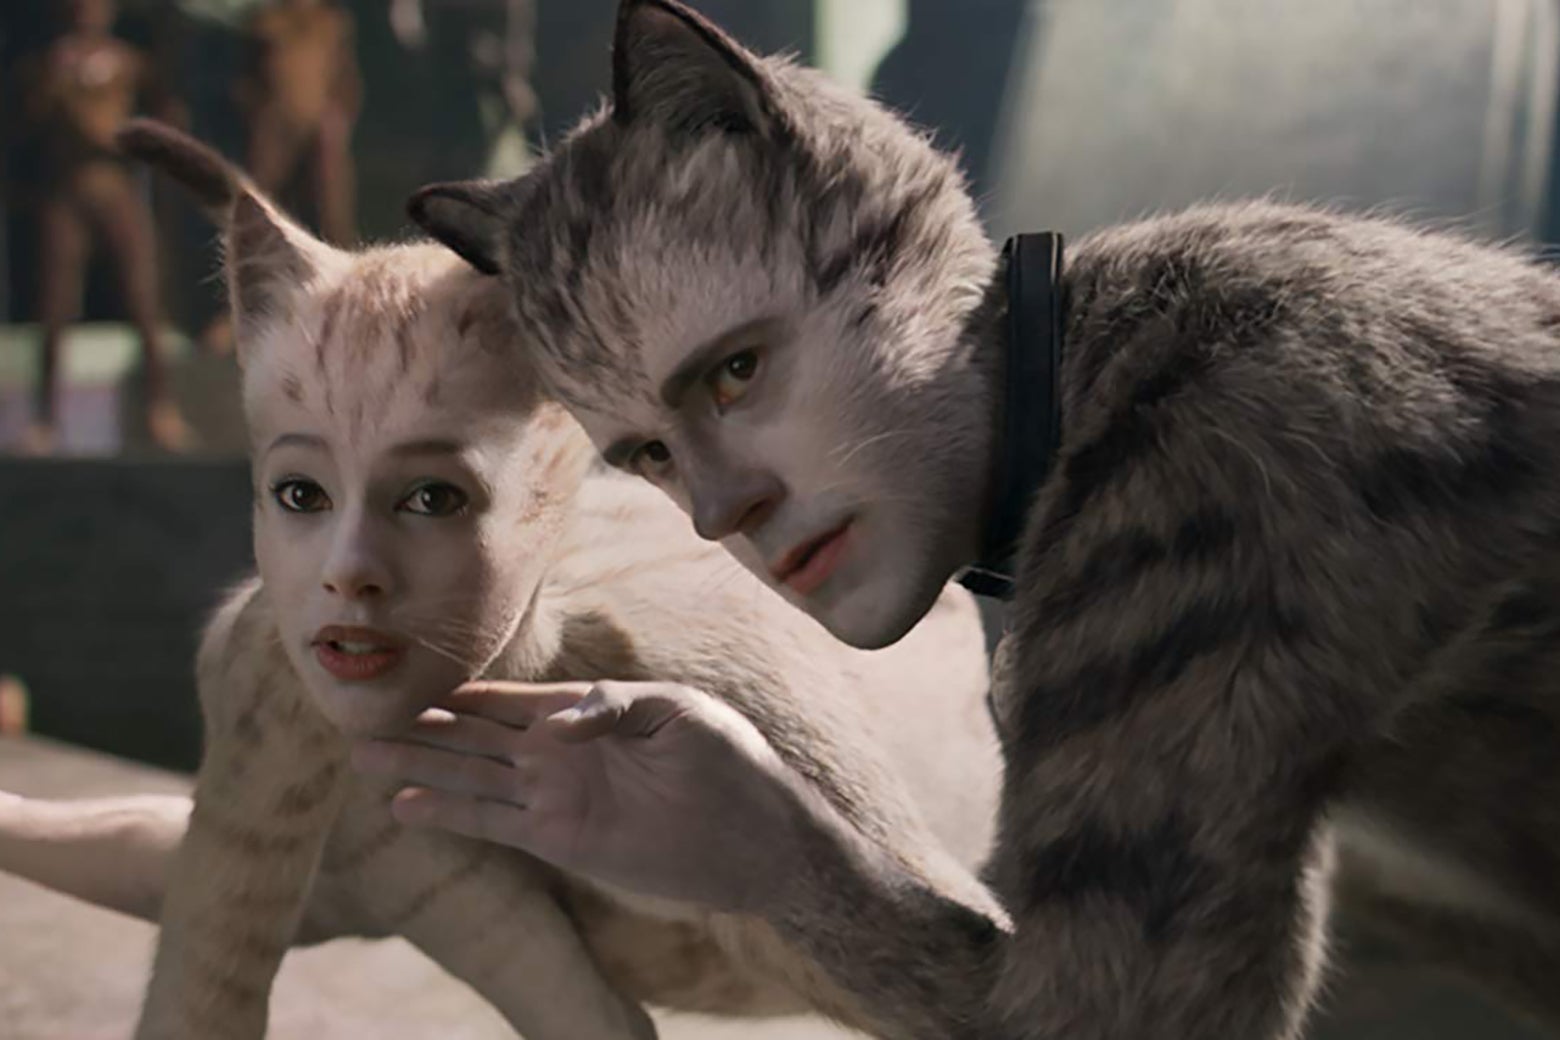 Francesca Hayward and Robbie Fairchild in a still from Cats. The actors' images have been CGI'ed into uncanny looking cats.